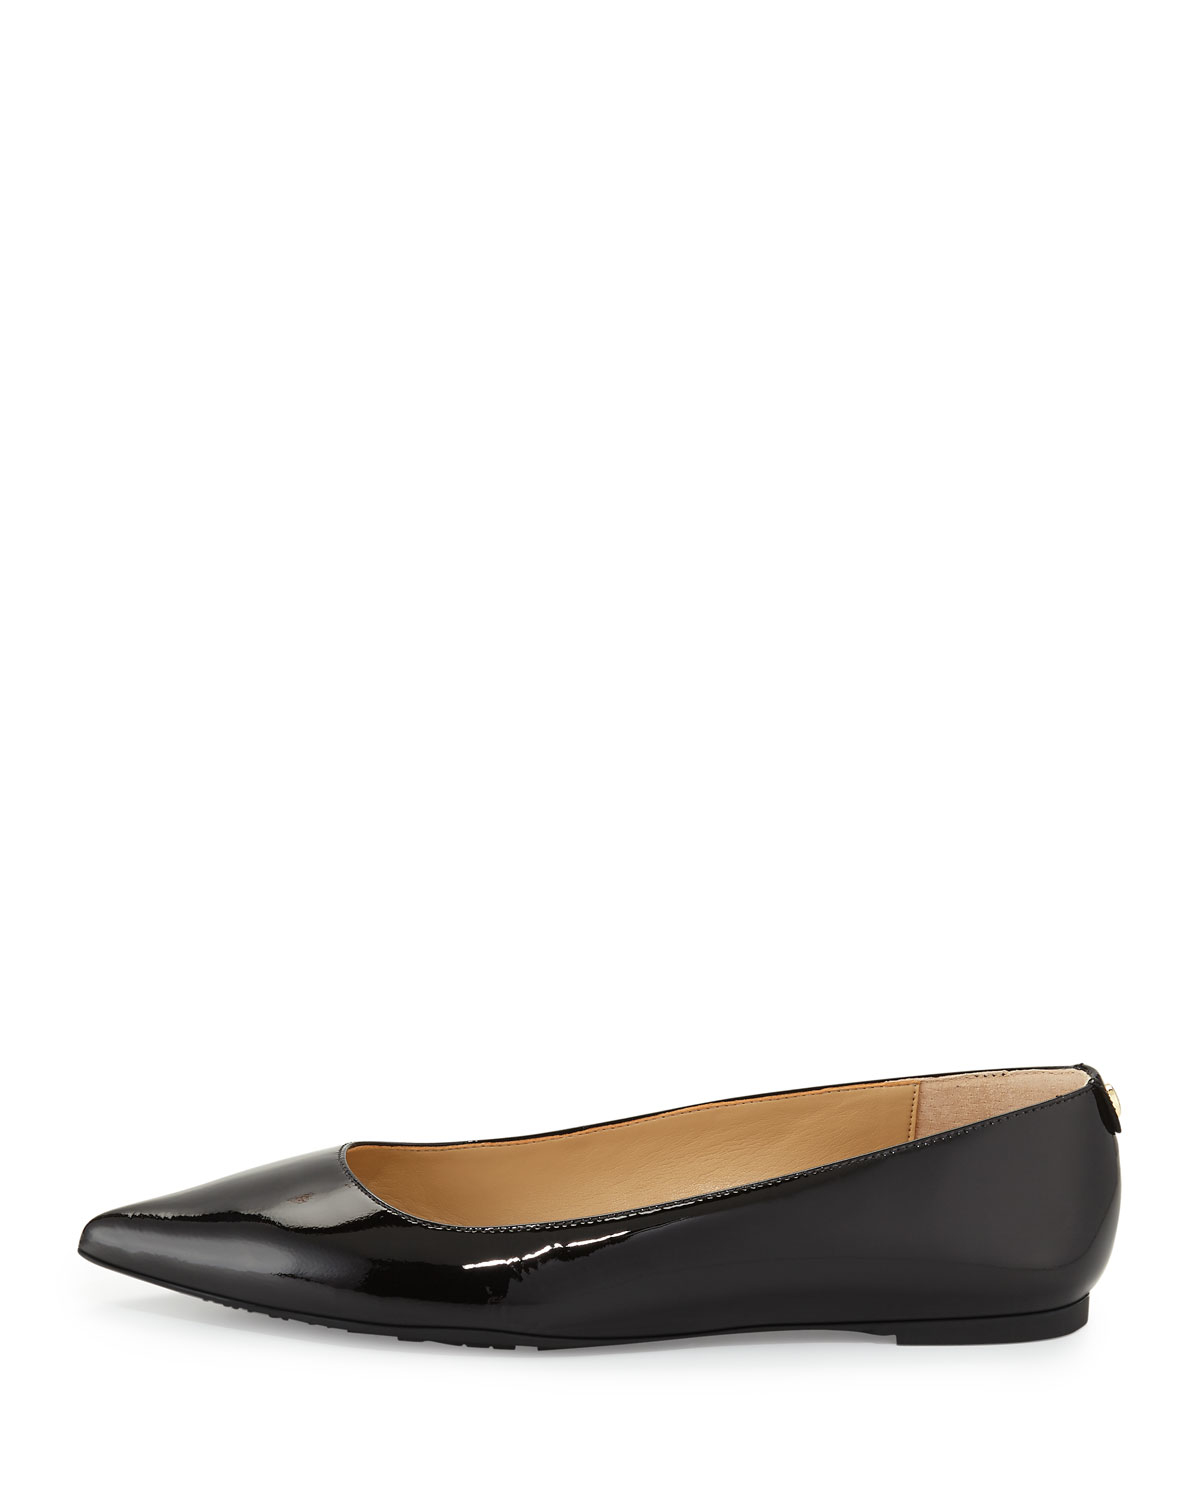 MICHAEL Michael Kors Arianna Patent Pointed-toe Flat in Black - Lyst